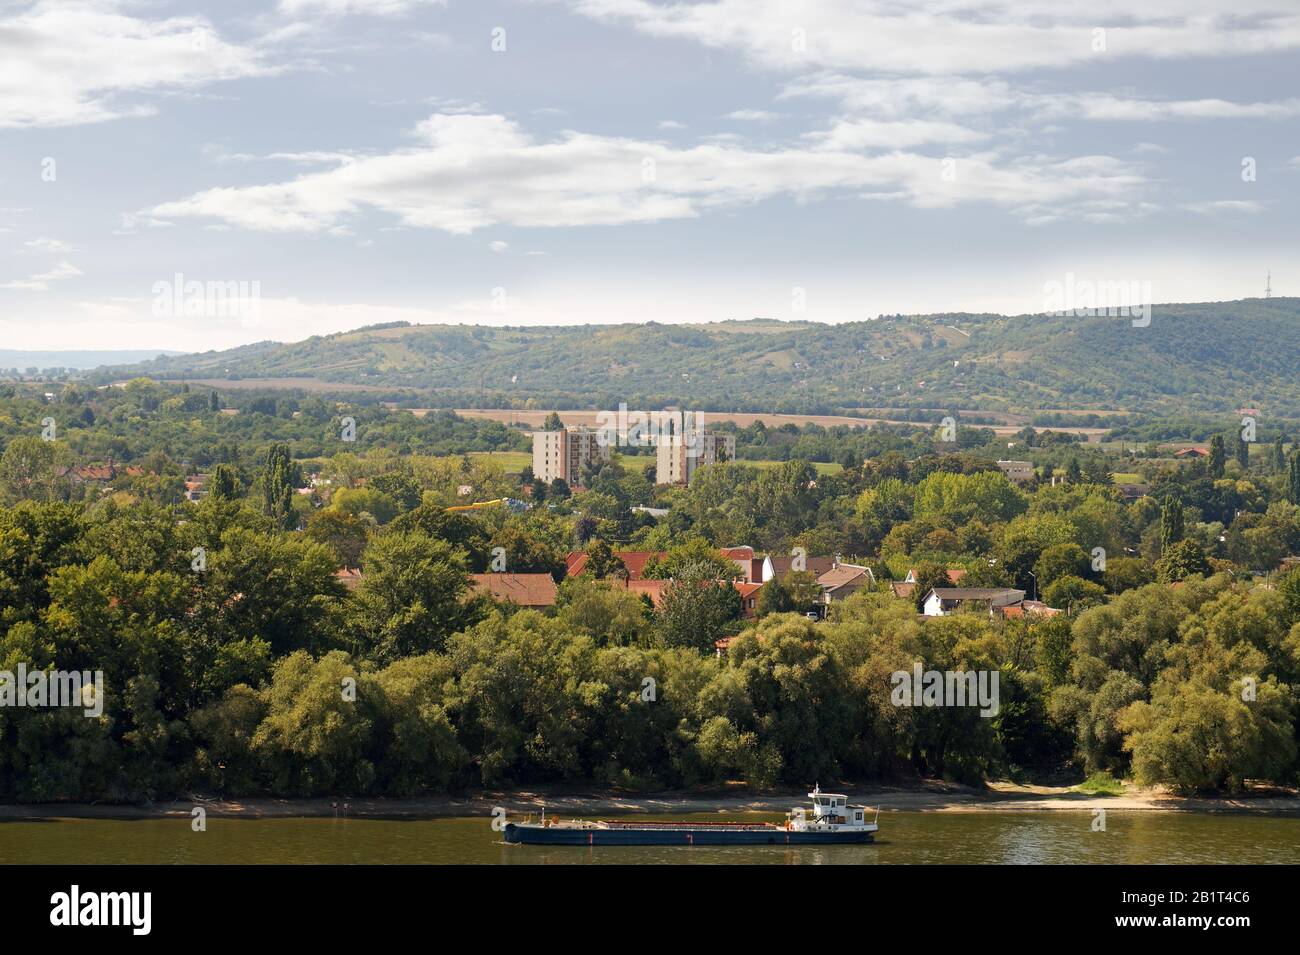 Sturovo is a city on the Hungarian-Slovakian border lying on the banks of the Danube. Stock Photo